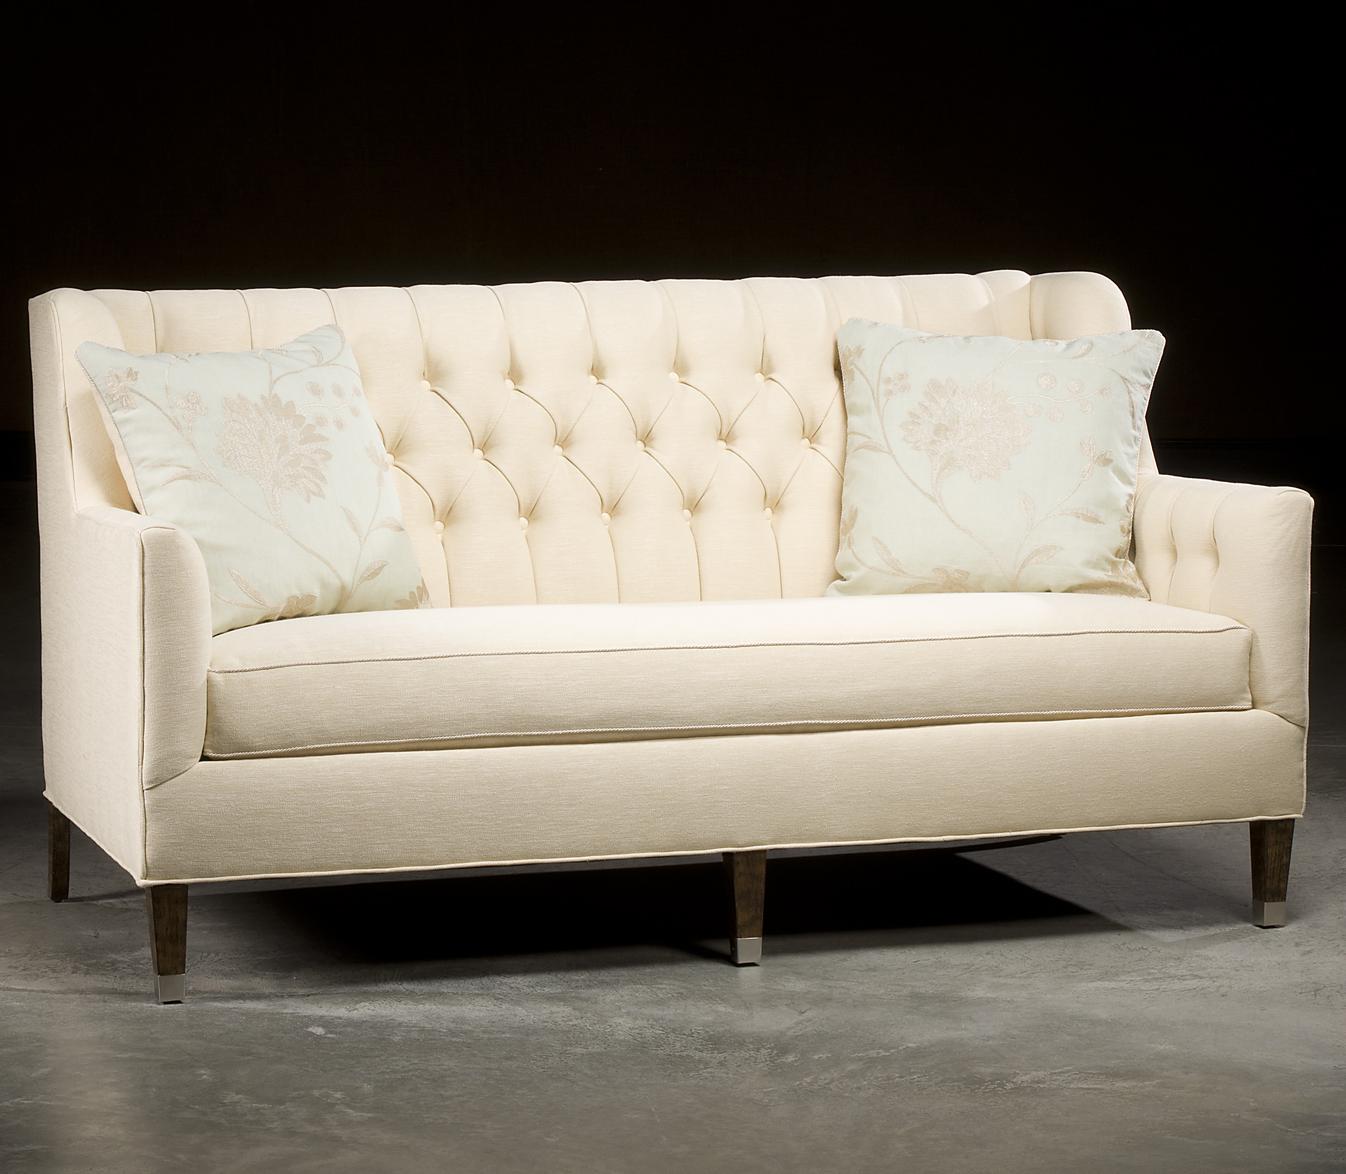 Settee Styled Loveseat with Deep Tufted Seat Back